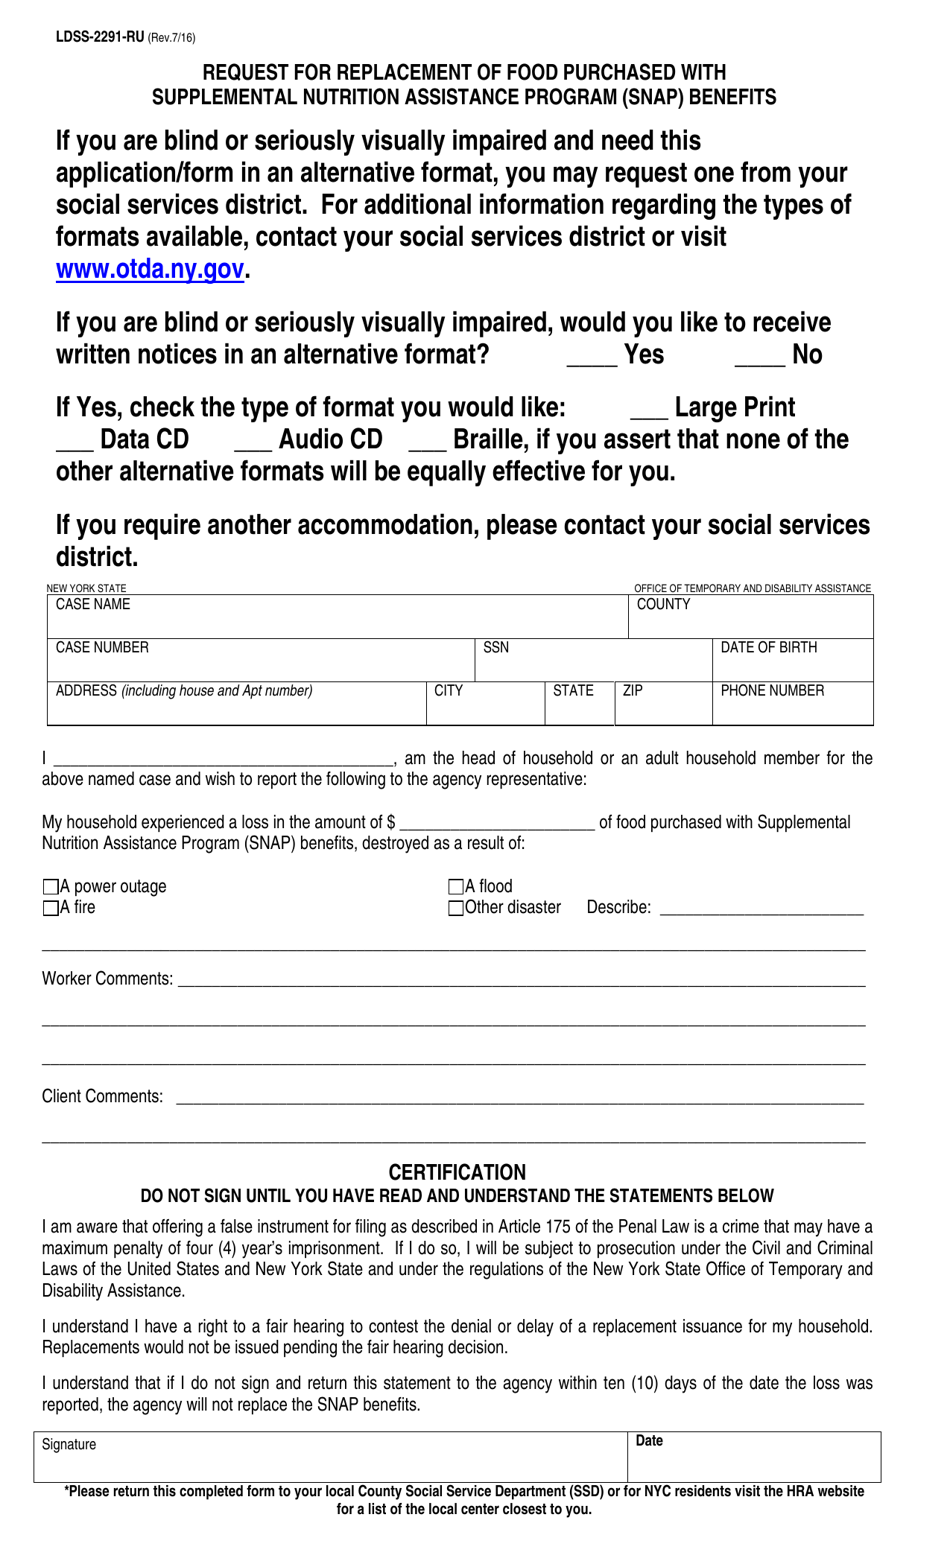 Form LDSS-2291 Request for Replacement of Food Purchased With Supplemental Nutrition Assistance Program (Snap) Benefits - New York (English / Russian), Page 1